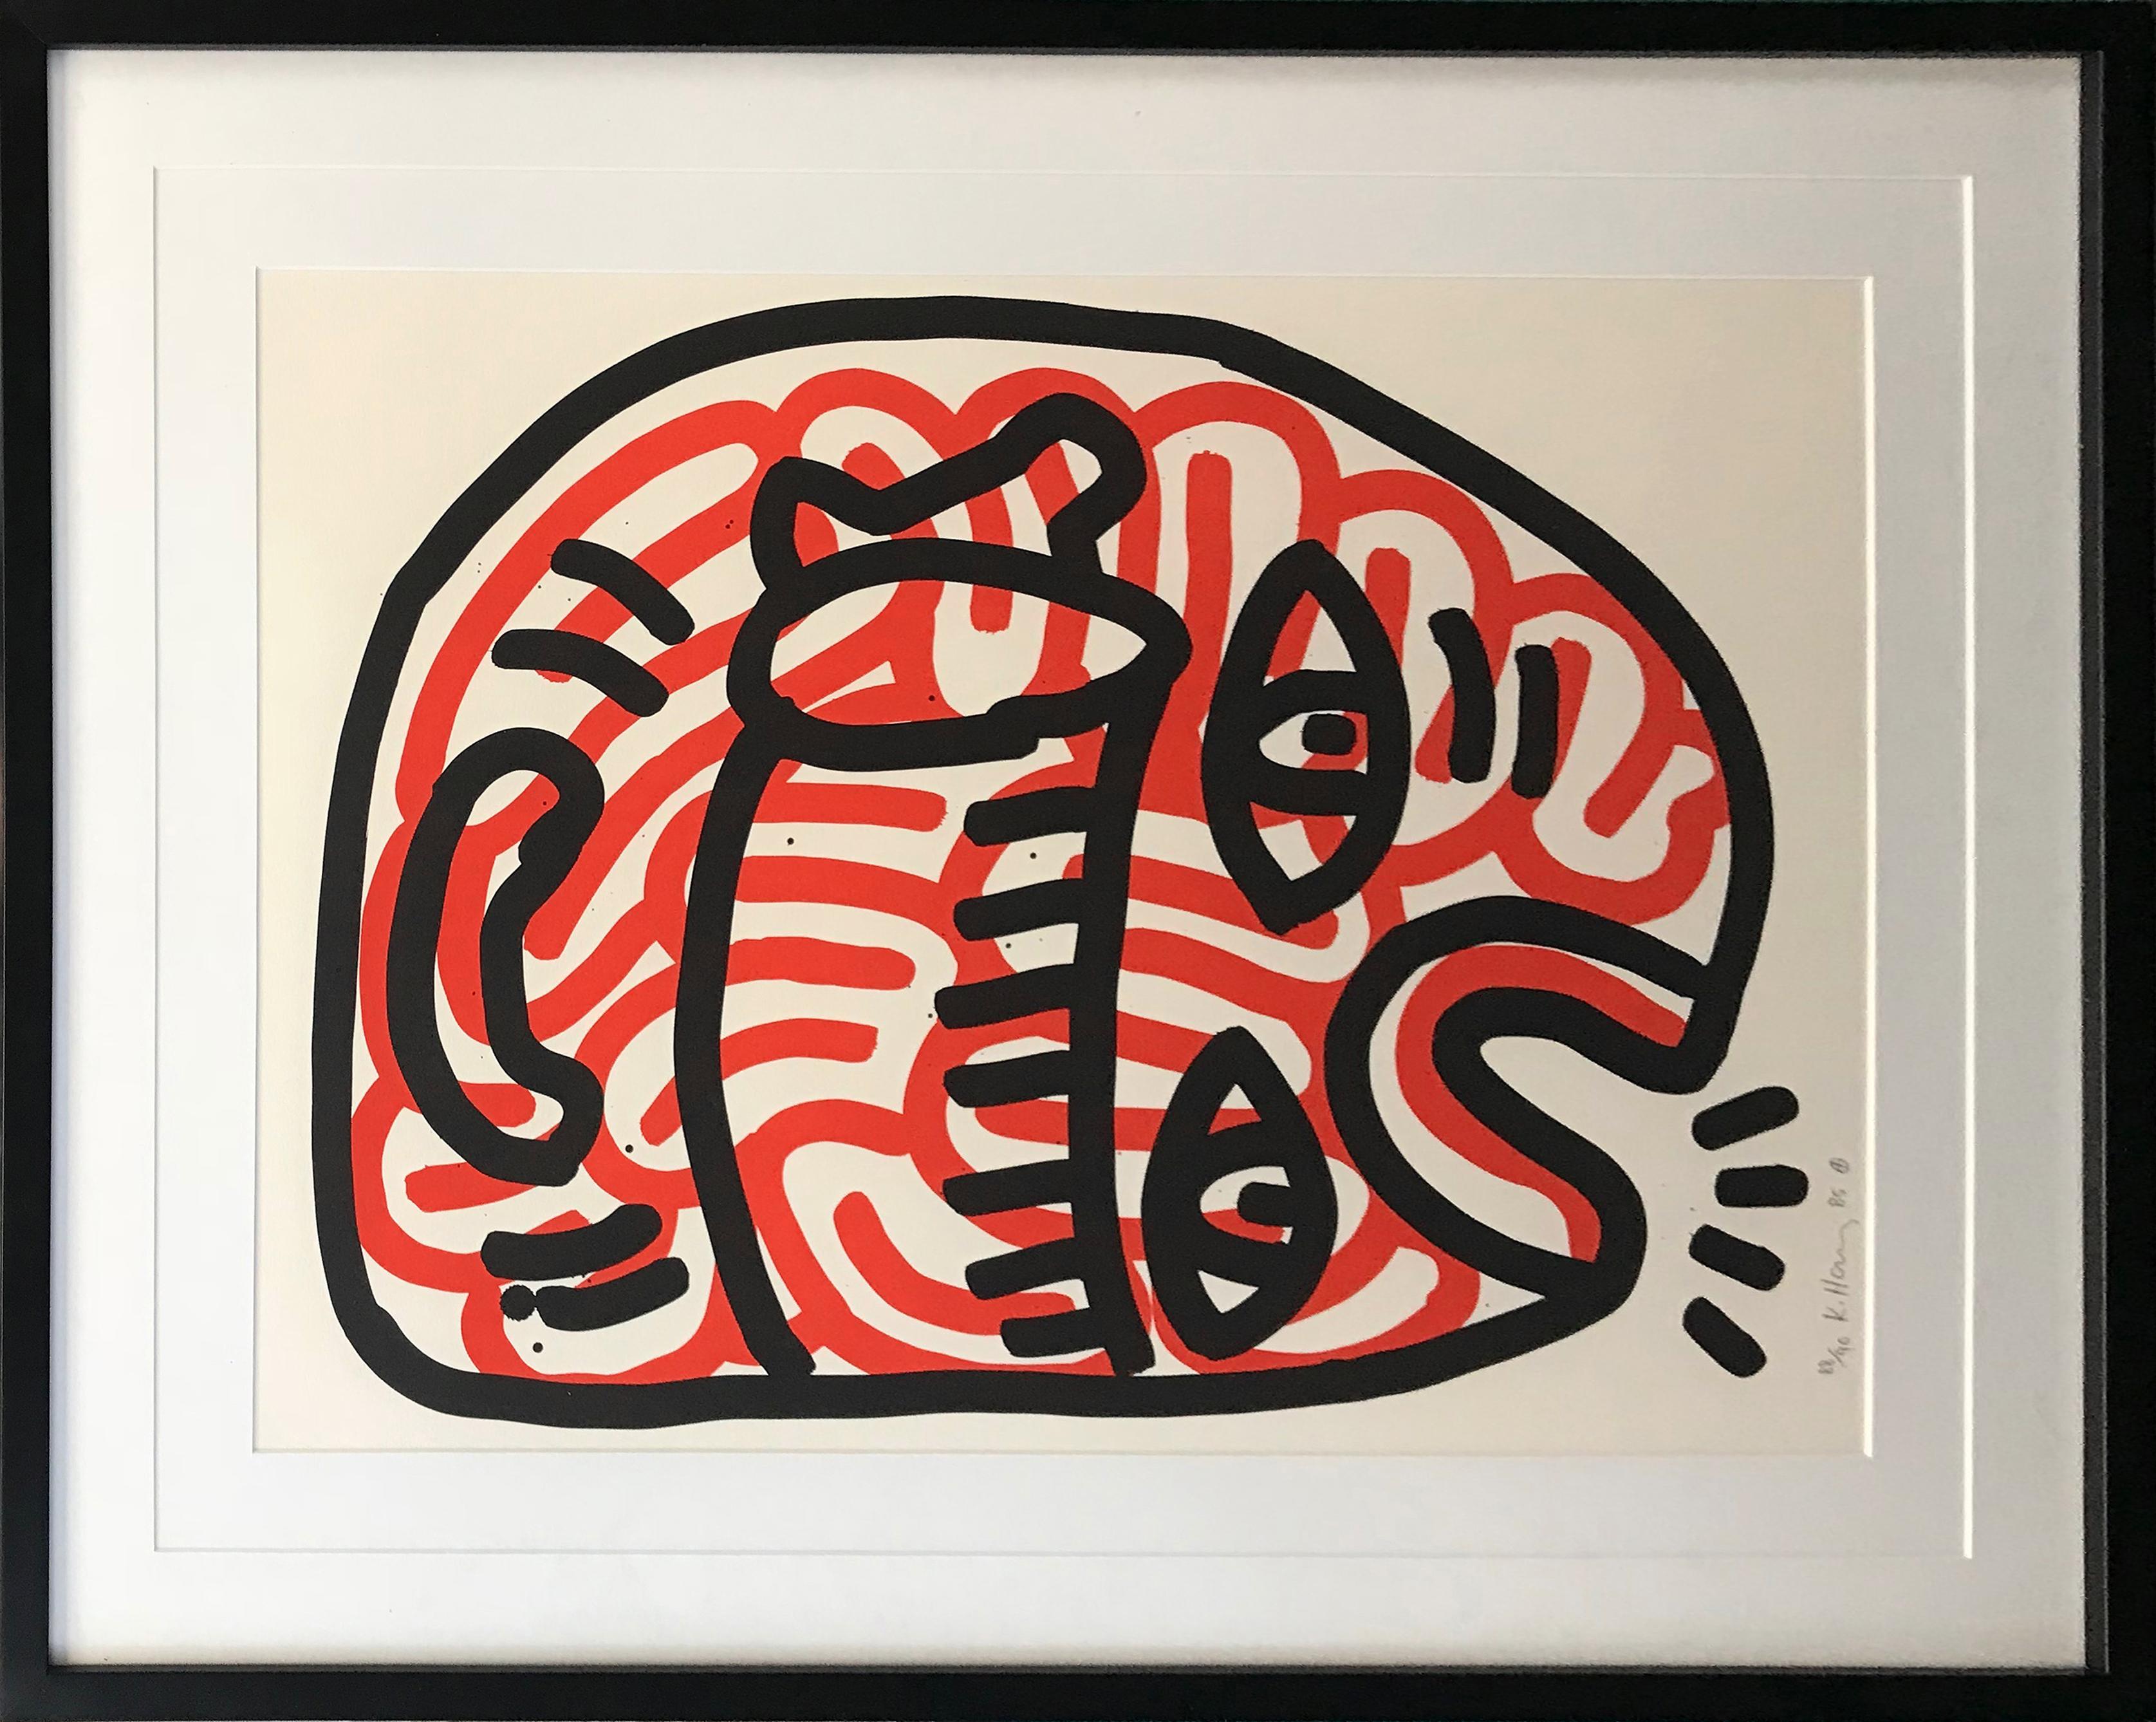 LUDO - Beige Figurative Print by Keith Haring